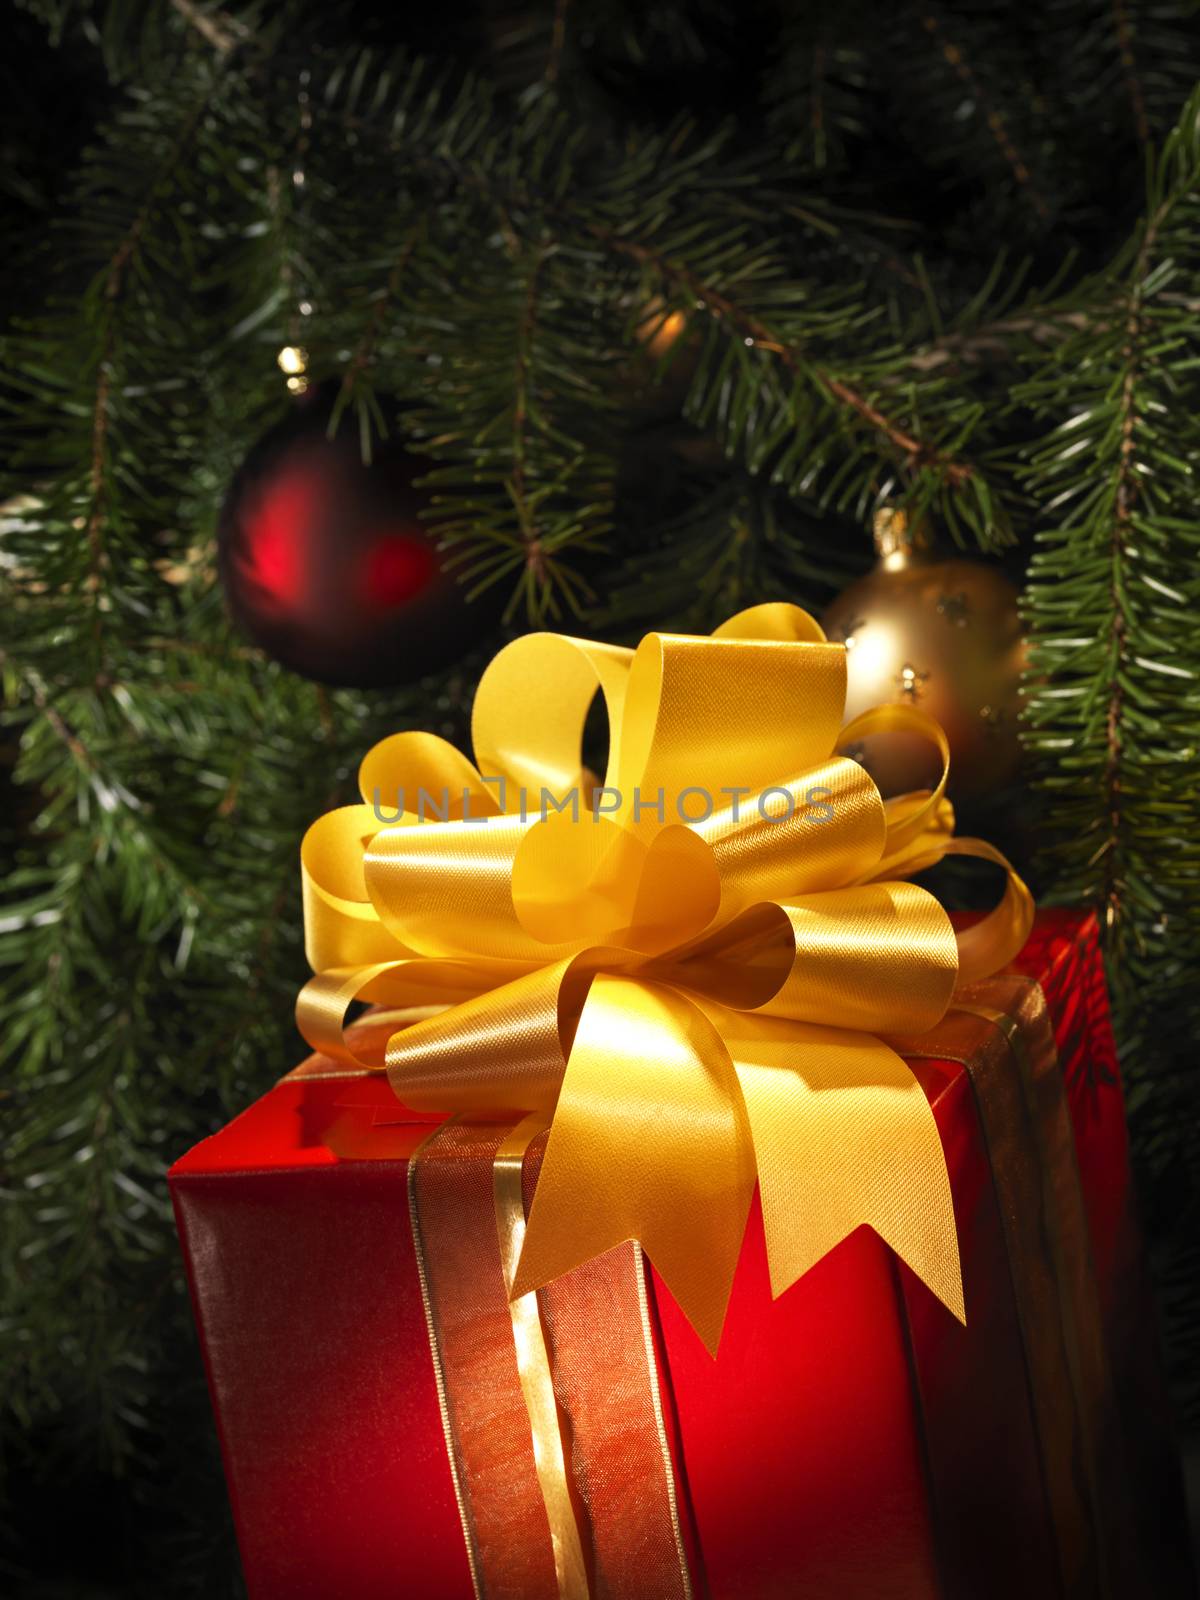 Christmas gift with a tree in the background by janssenkruseproductions